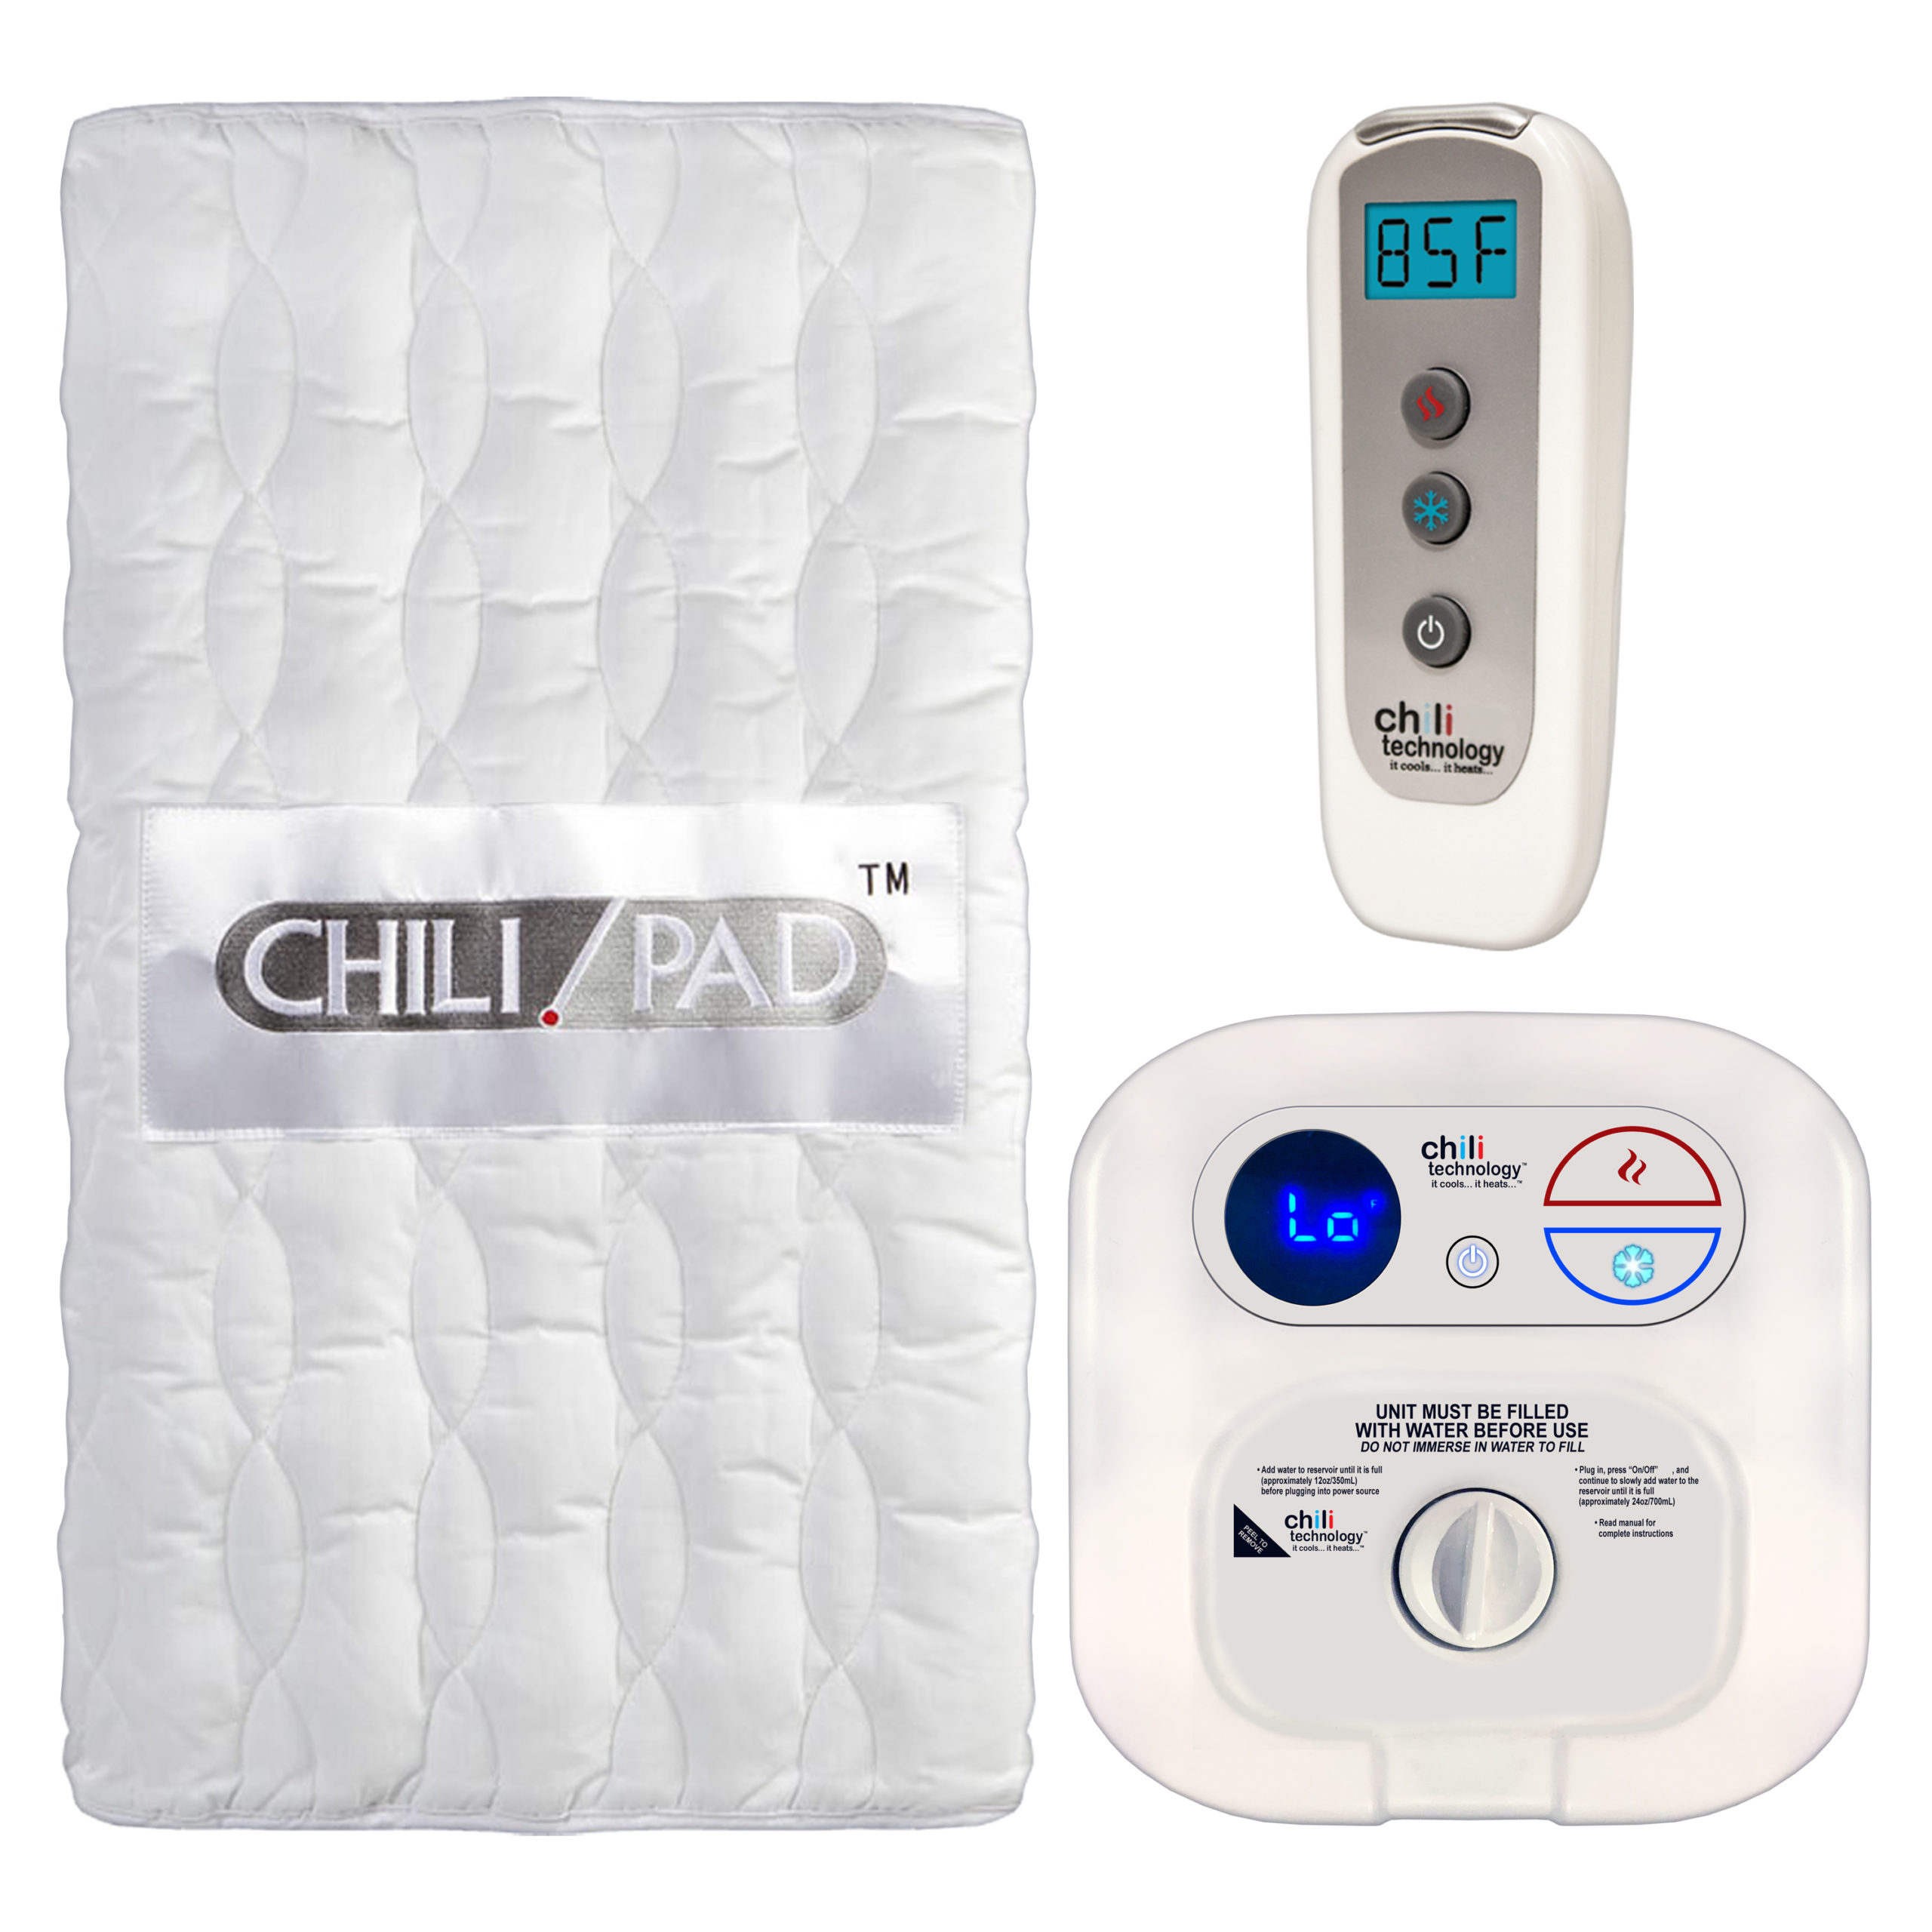 Sleep Number Dual Temp - Chilipad|Temperature|Mattress|Cube|Sleep|Bed|Water|System|Pad|Ooler|Control|Unit|Night|Bedjet|Technology|Side|Air|Product|Review|Body|Time|Degrees|Noise|Price|Pod|Tubes|Heat|Device|Cooling|Room|King|App|Features|Size|Cover|Sleepers|Sheets|Energy|Warranty|Quality|Mattress Pad|Control Unit|Cube Sleep System|Sleep Pod|Distilled Water|Remote Control|Sleep System|Desired Temperature|Water Tank|Chilipad Cube|Chili Technology|Deep Sleep|Pro Cover|Ooler Sleep System|Hydrogen Peroxide|Cool Mesh|Sleep Temperature|Fitted Sheet|Pod Pro|Sleep Quality|Smartphone App|Sleep Systems|Chilipad Sleep System|New Mattress|Sleep Trial|Full Refund|Mattress Topper|Body Heat|Air Flow|Chilipad Review